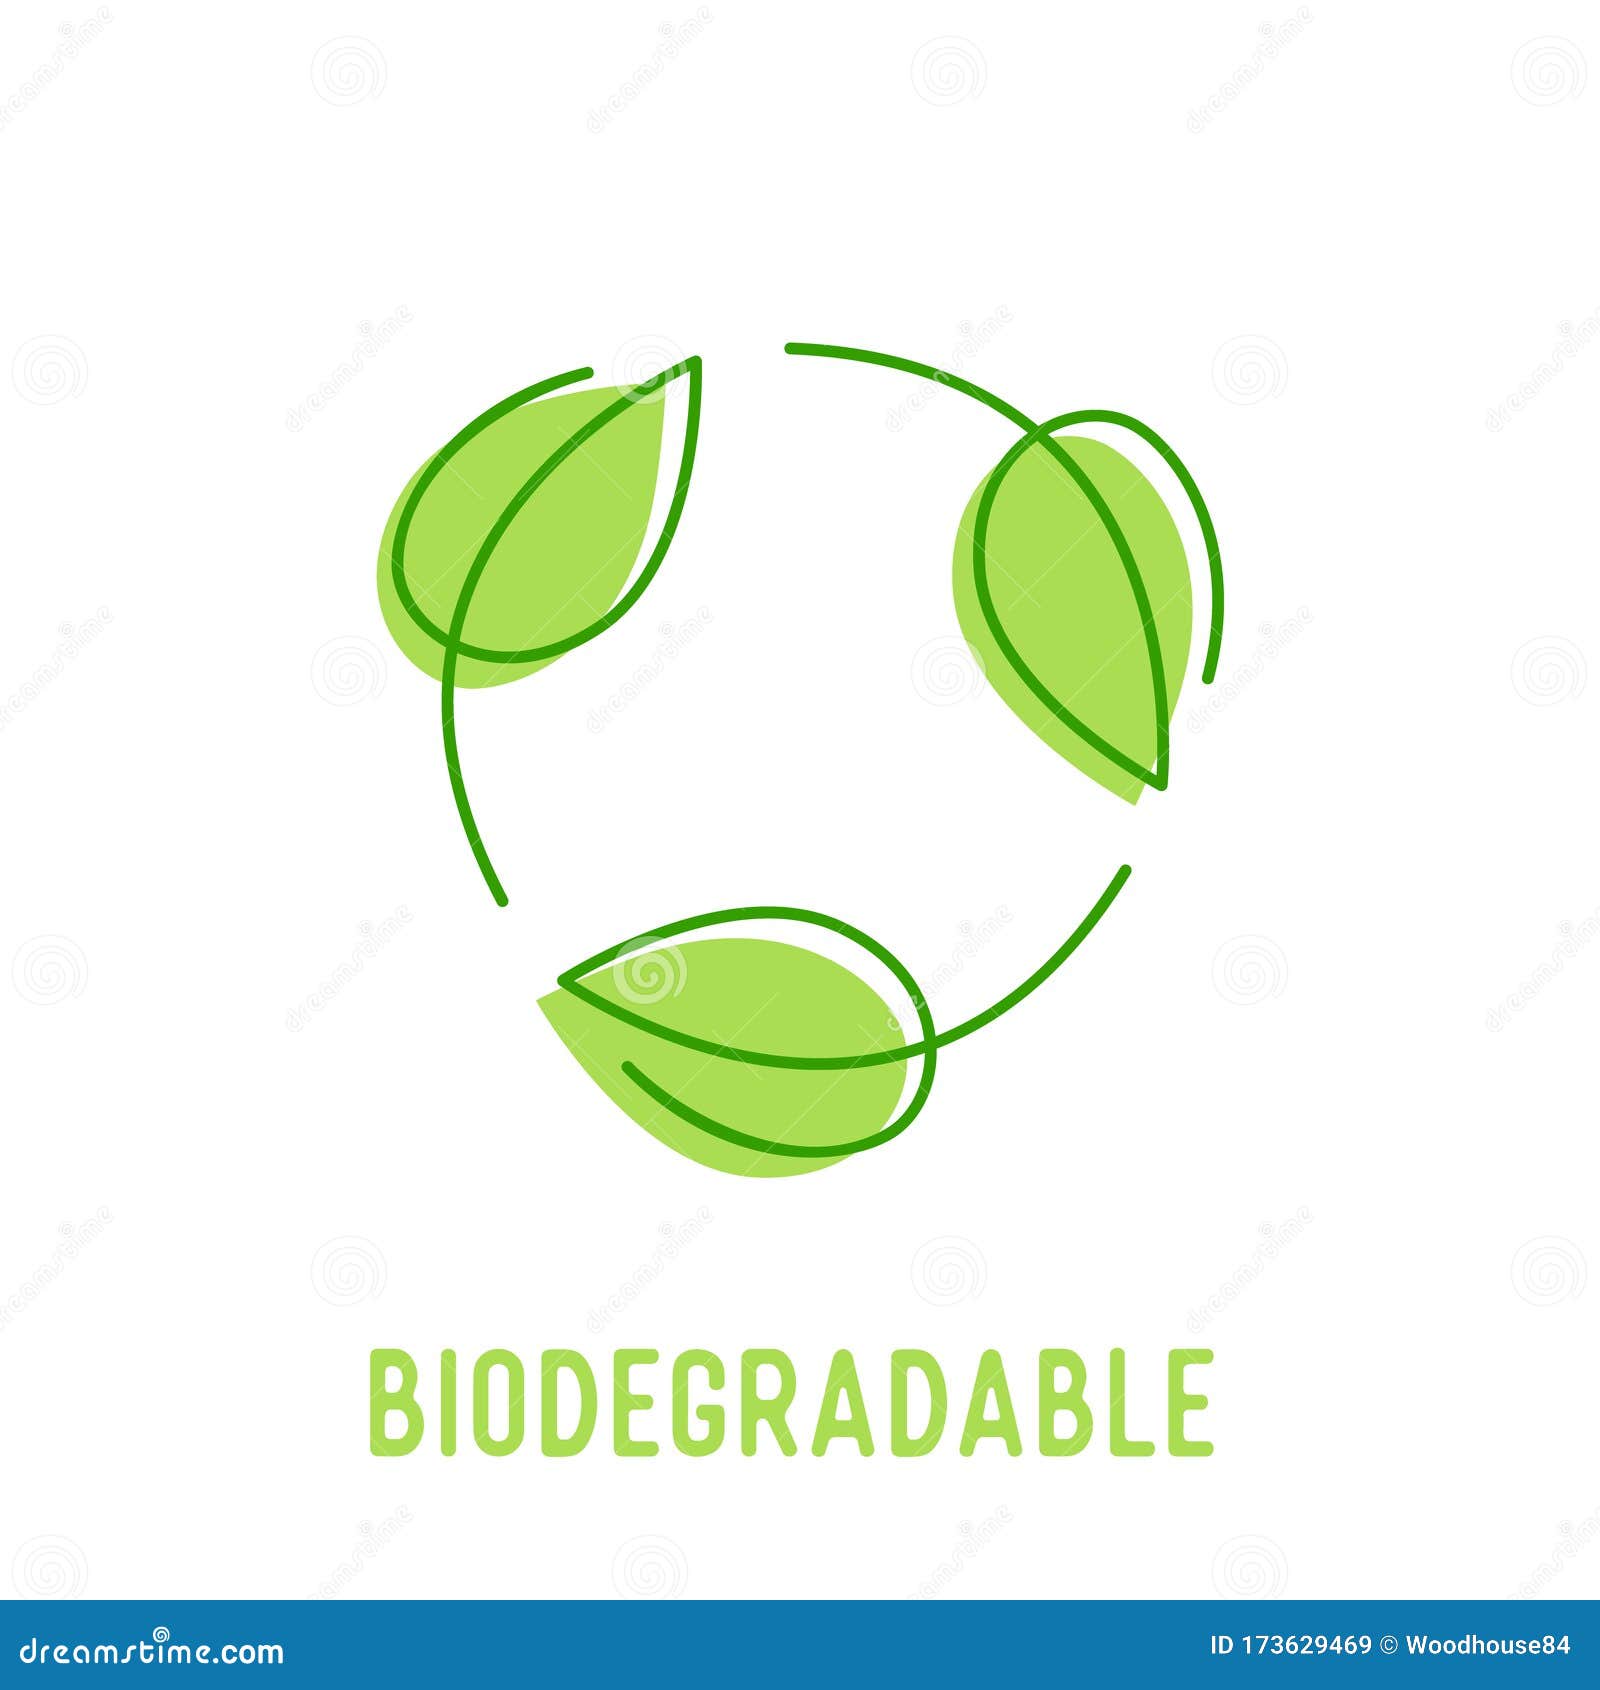 biodegradable  with circulate rotating green leaves. compostable recyclable plastic package icon